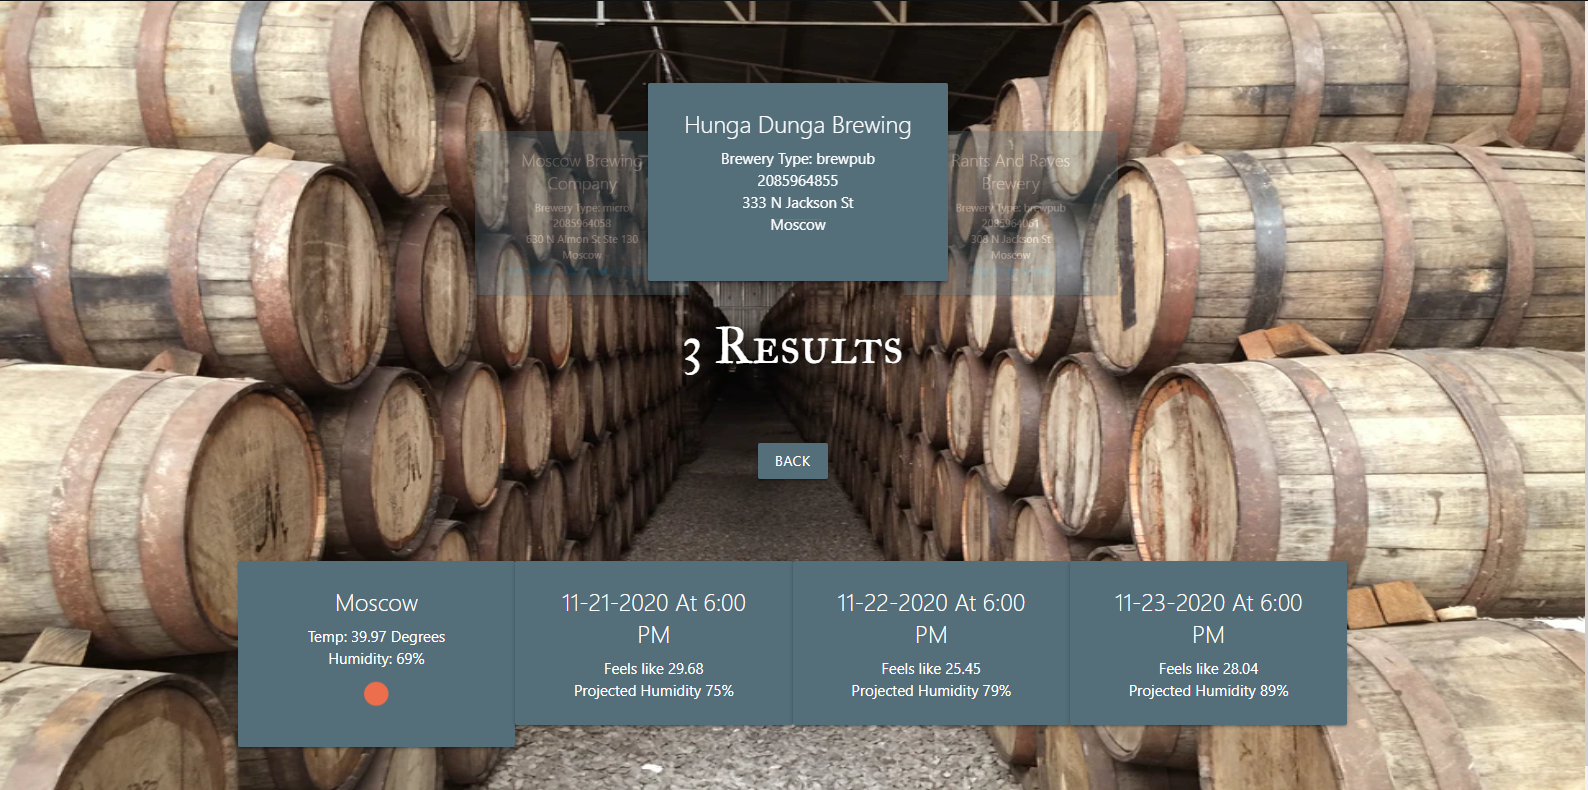 The results page, showing the breweries in the zip code above, and a weather forecast below.